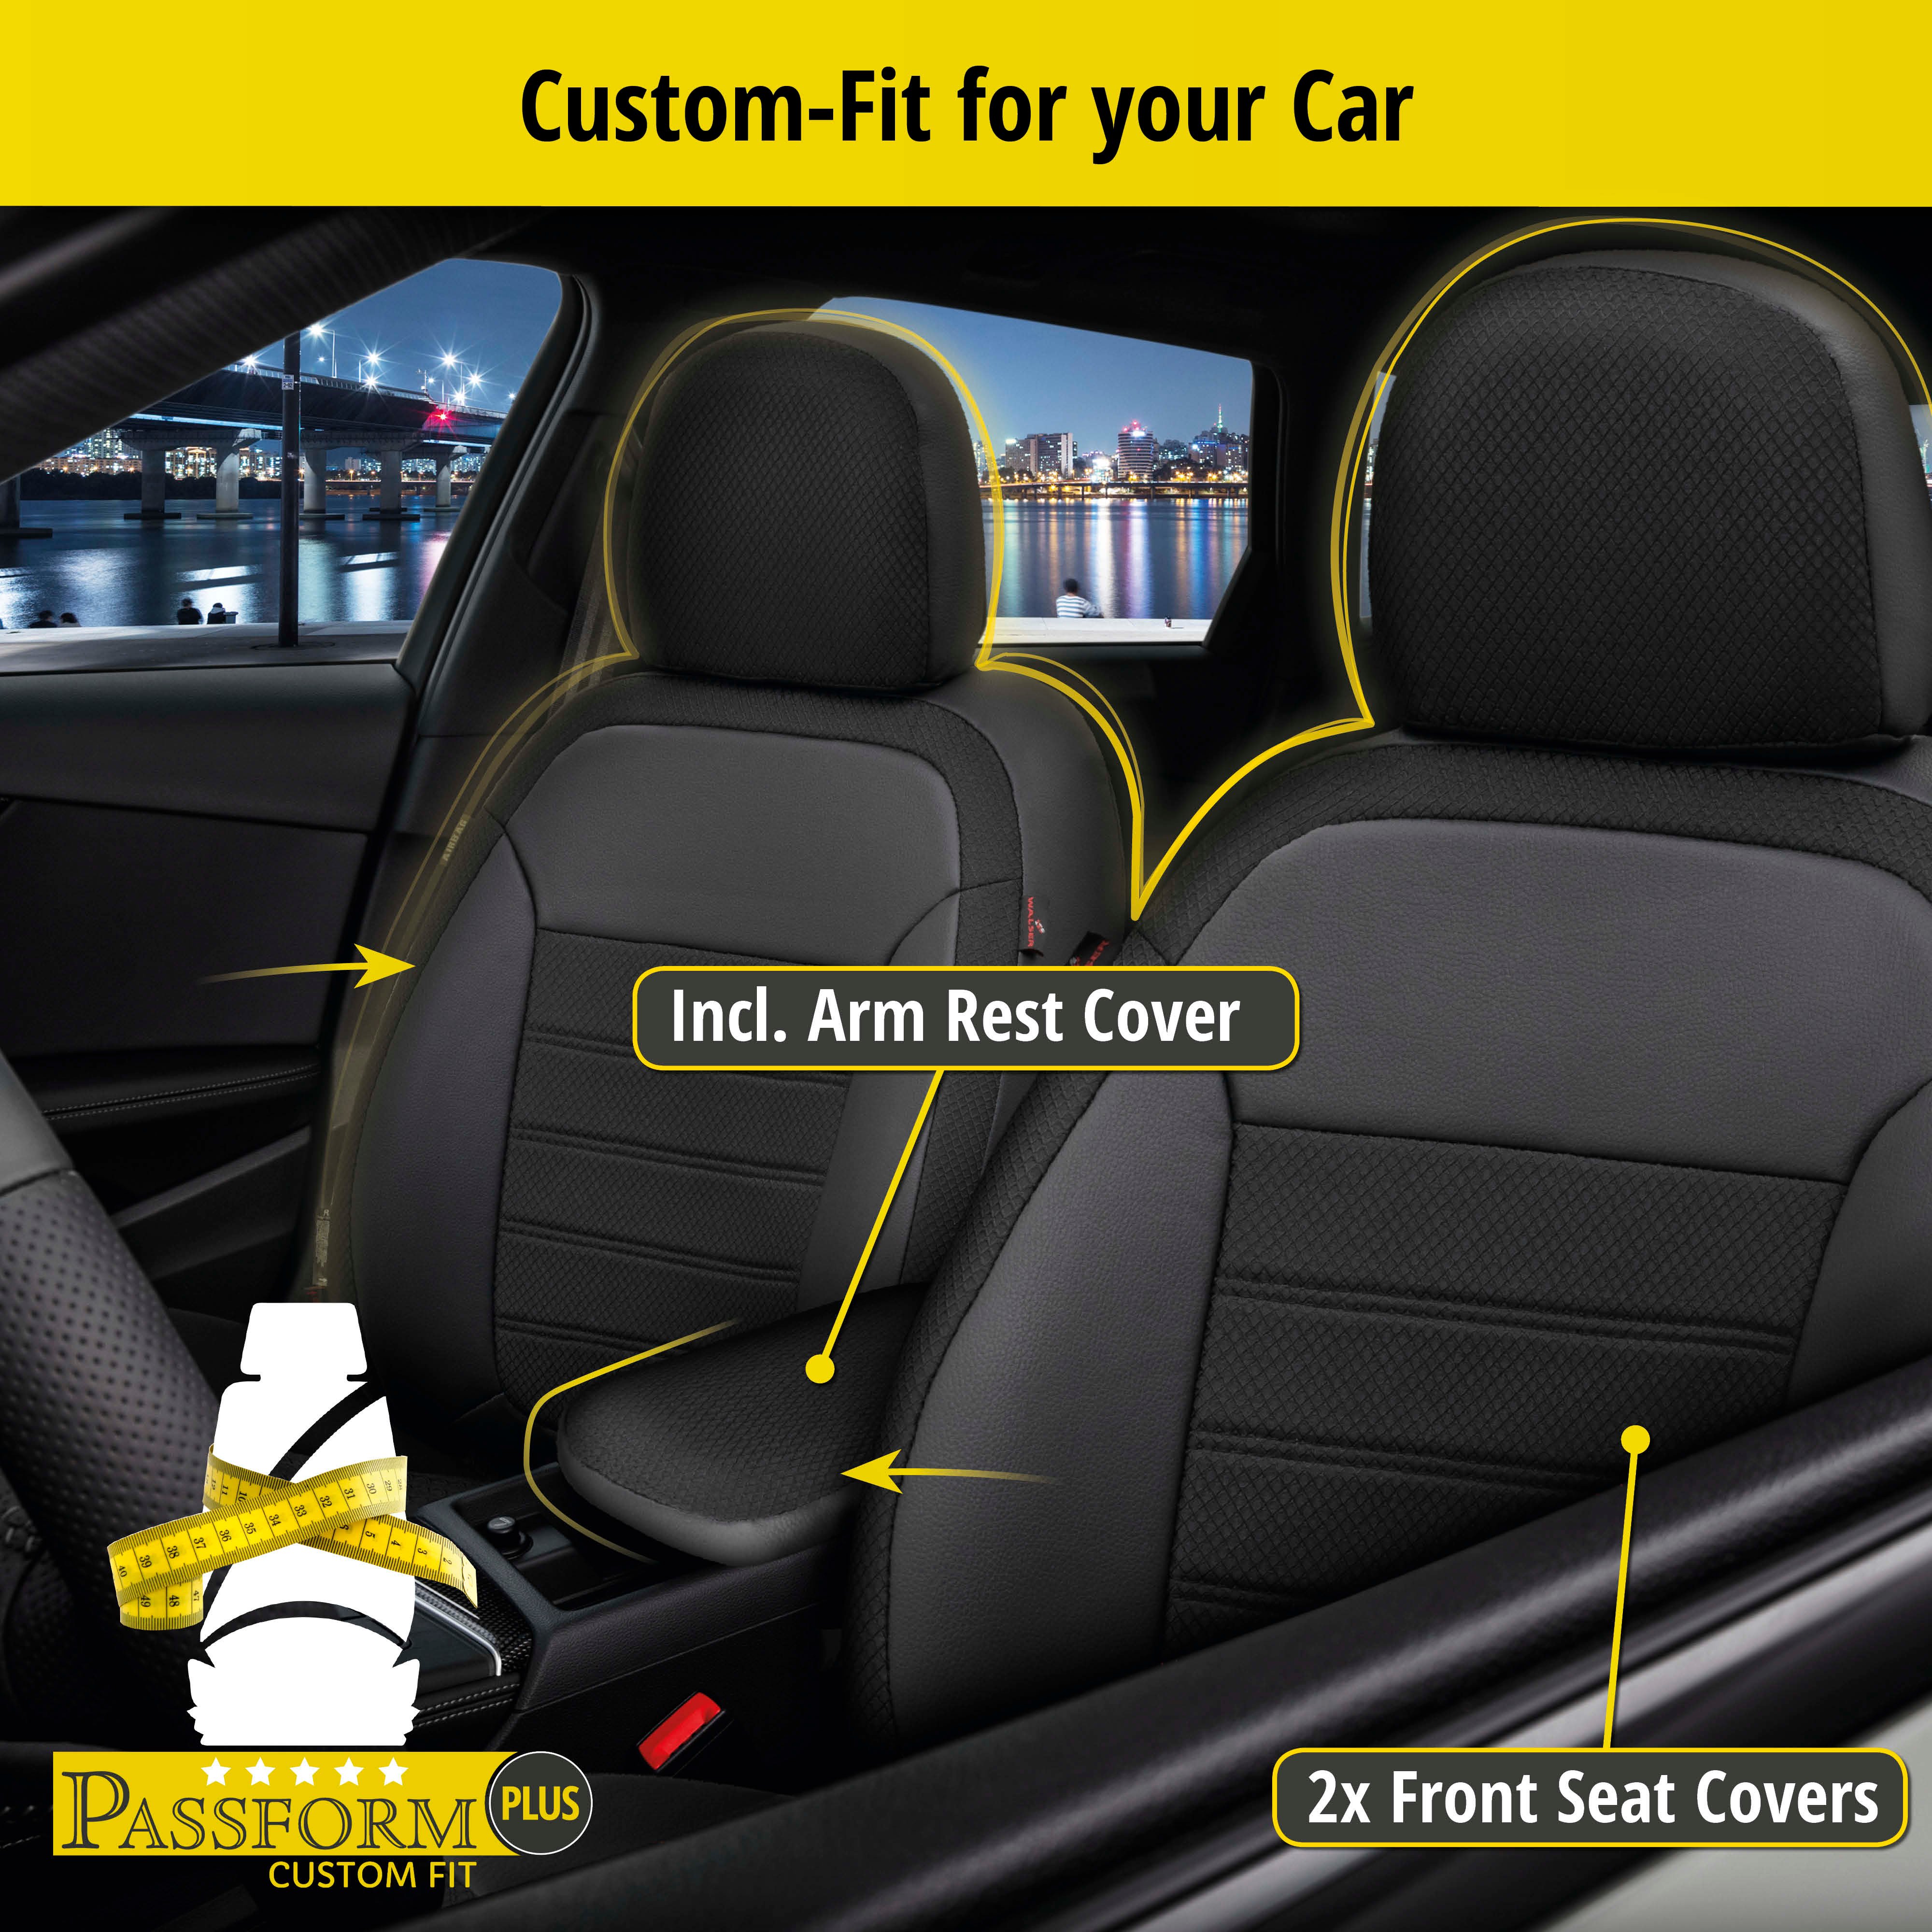 Seat Cover Aversa for VW Passat Comfortline 2015-Today, 2 seat covers for sport seats